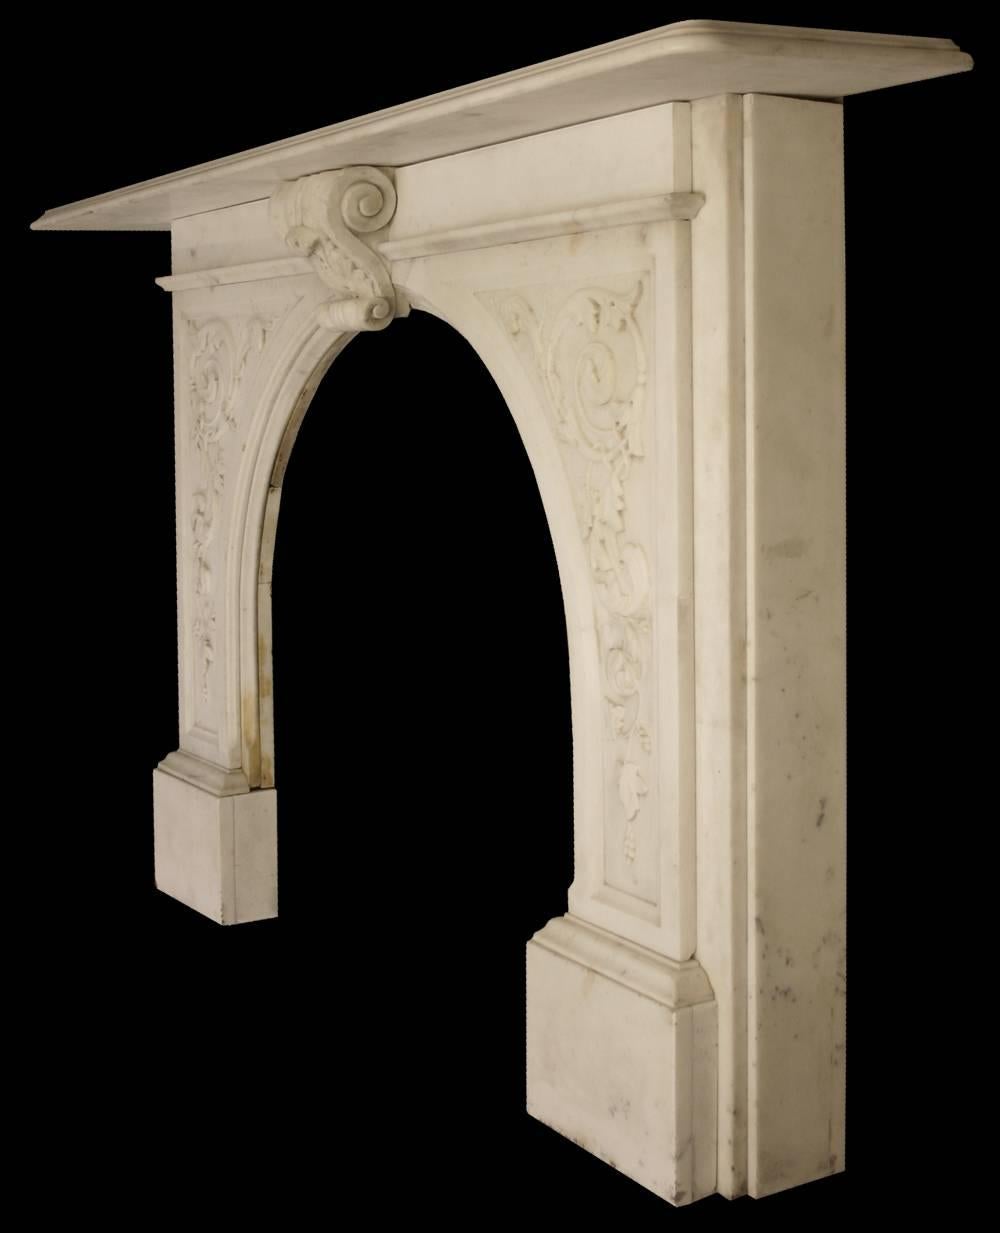 A substantial antique Victorian carved statuary marble fire surround with arched aperture. Each leg is well carved with acanthus scrolls, so too is the large keystone.

Images prior to restoration. This chimneypiece is awaiting restoration, please